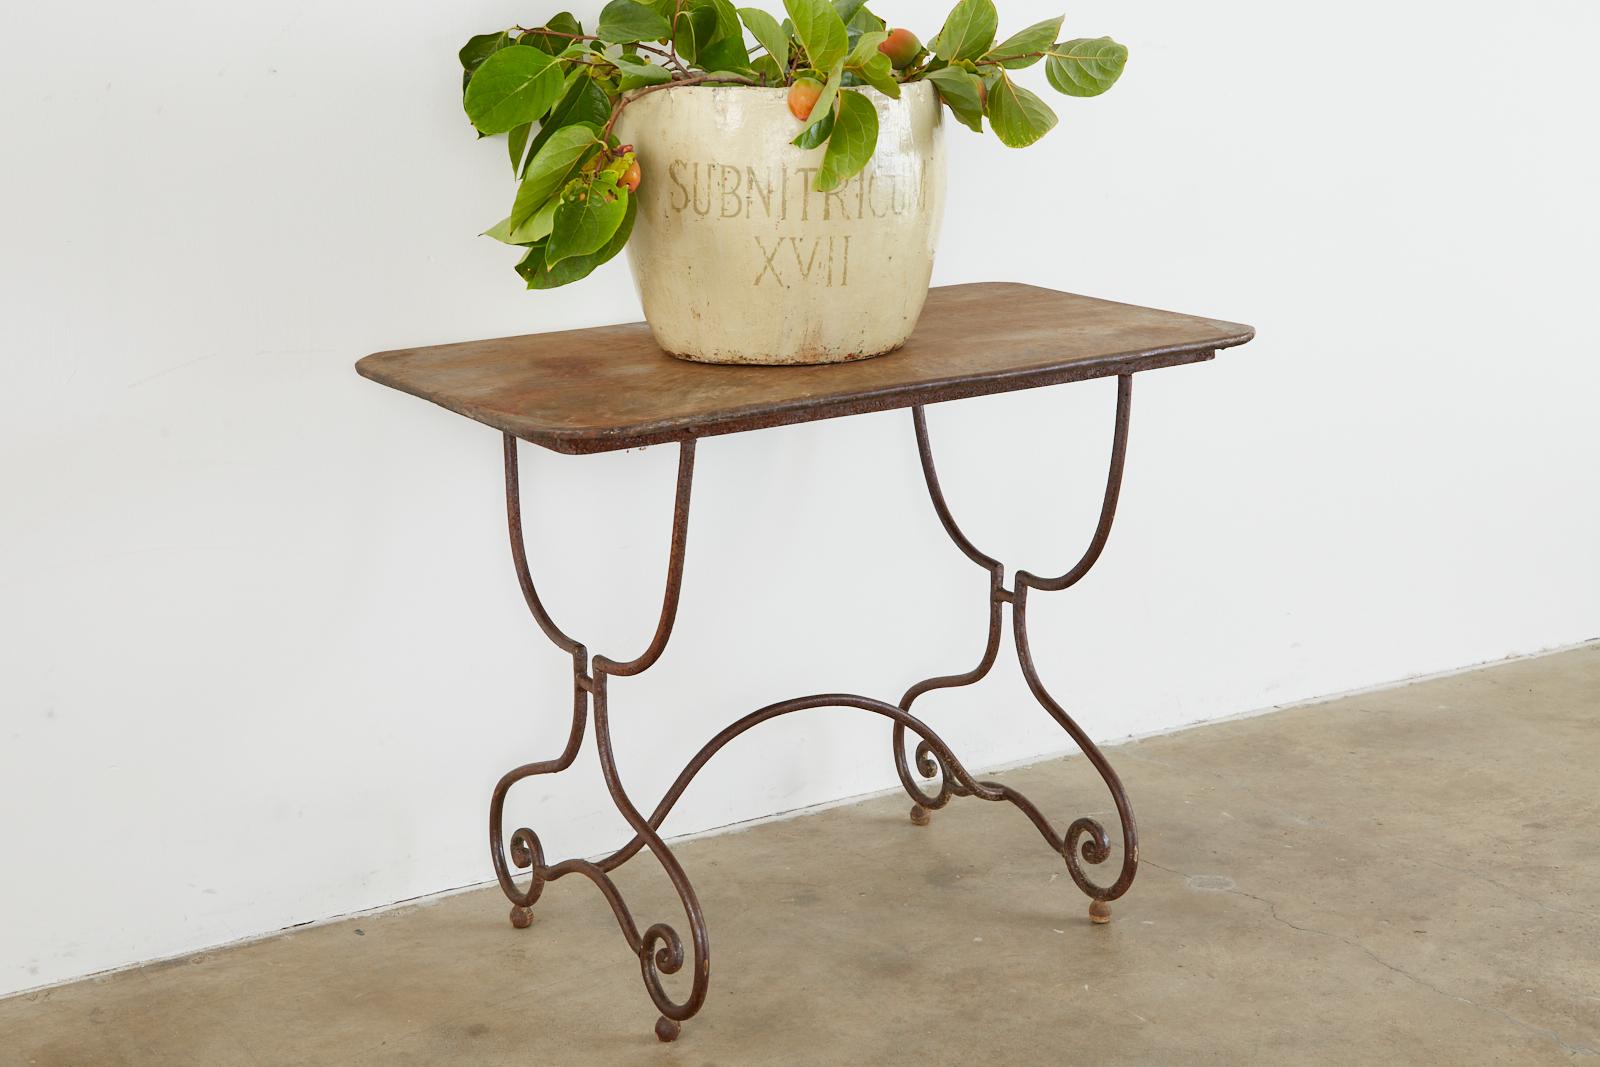 Charming French Art Nouveau bistro or cafe dining table crafted from wrought iron. Features a thick iron trestle style base with scrolled legs ending with ball feet. The legs are conjoined by a curved stretcher. Topped with a rectangular iron